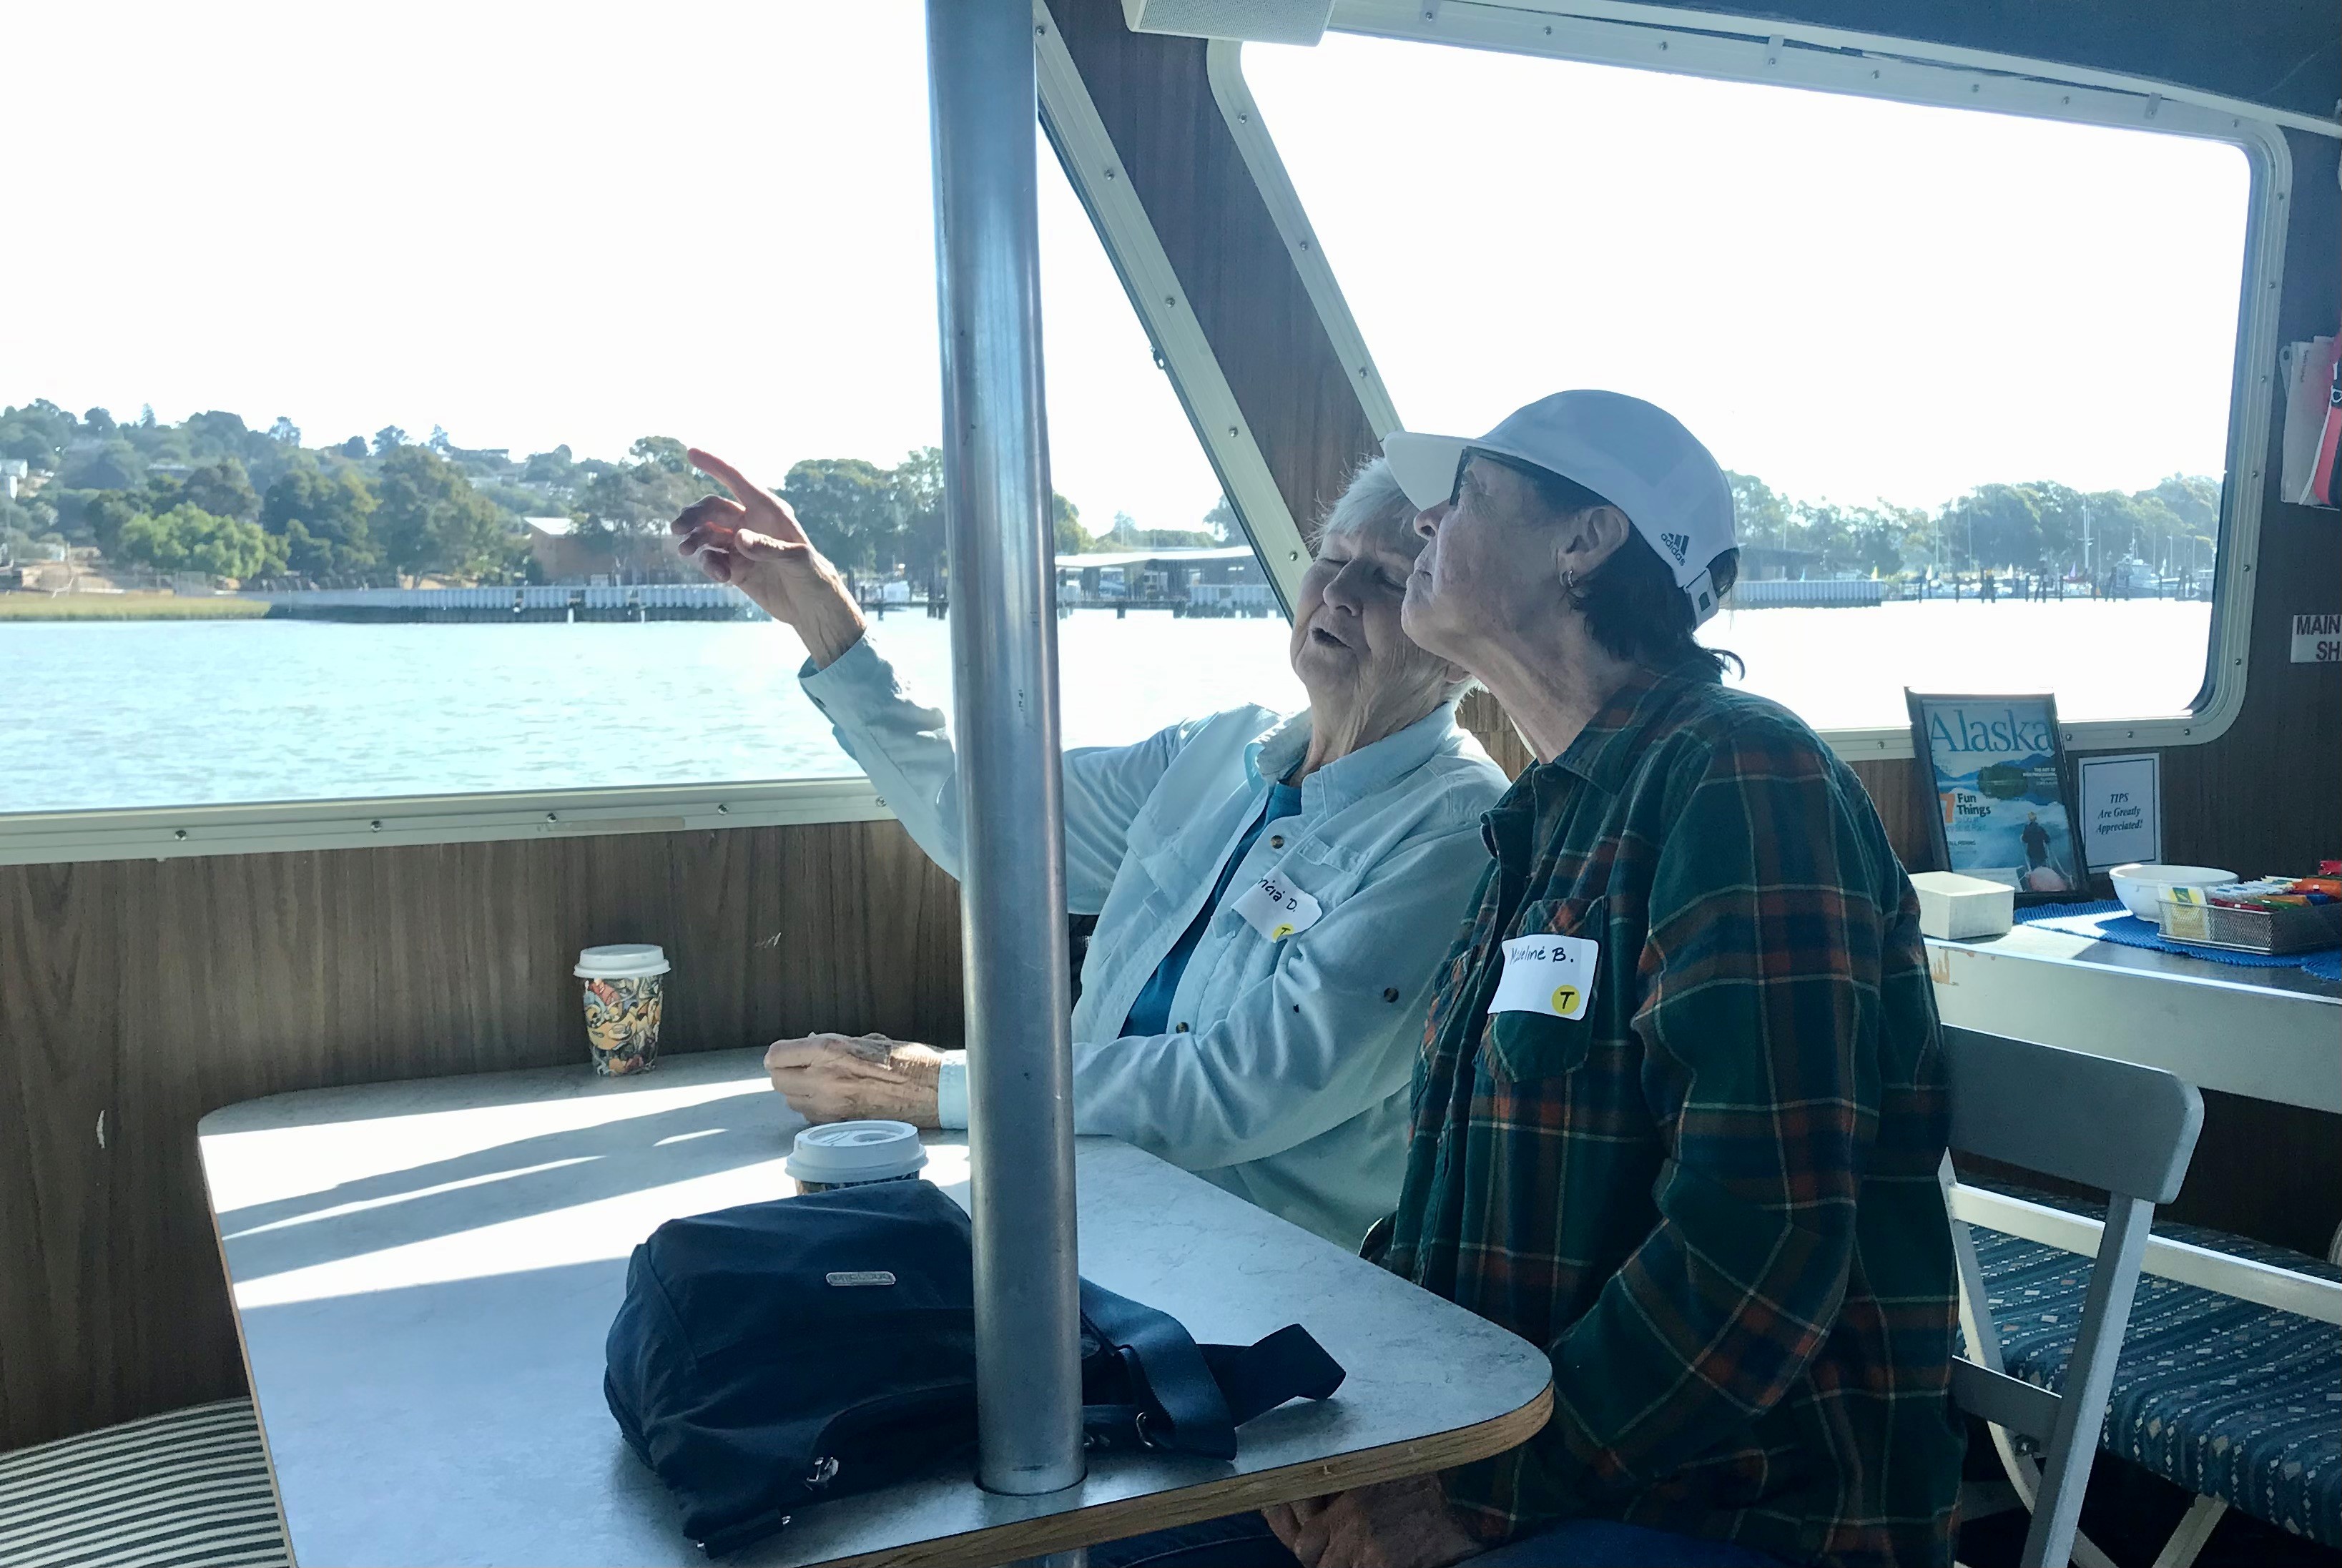 OLLI members Patricia and Madeline share memories of earlier days in the Napa Valley.